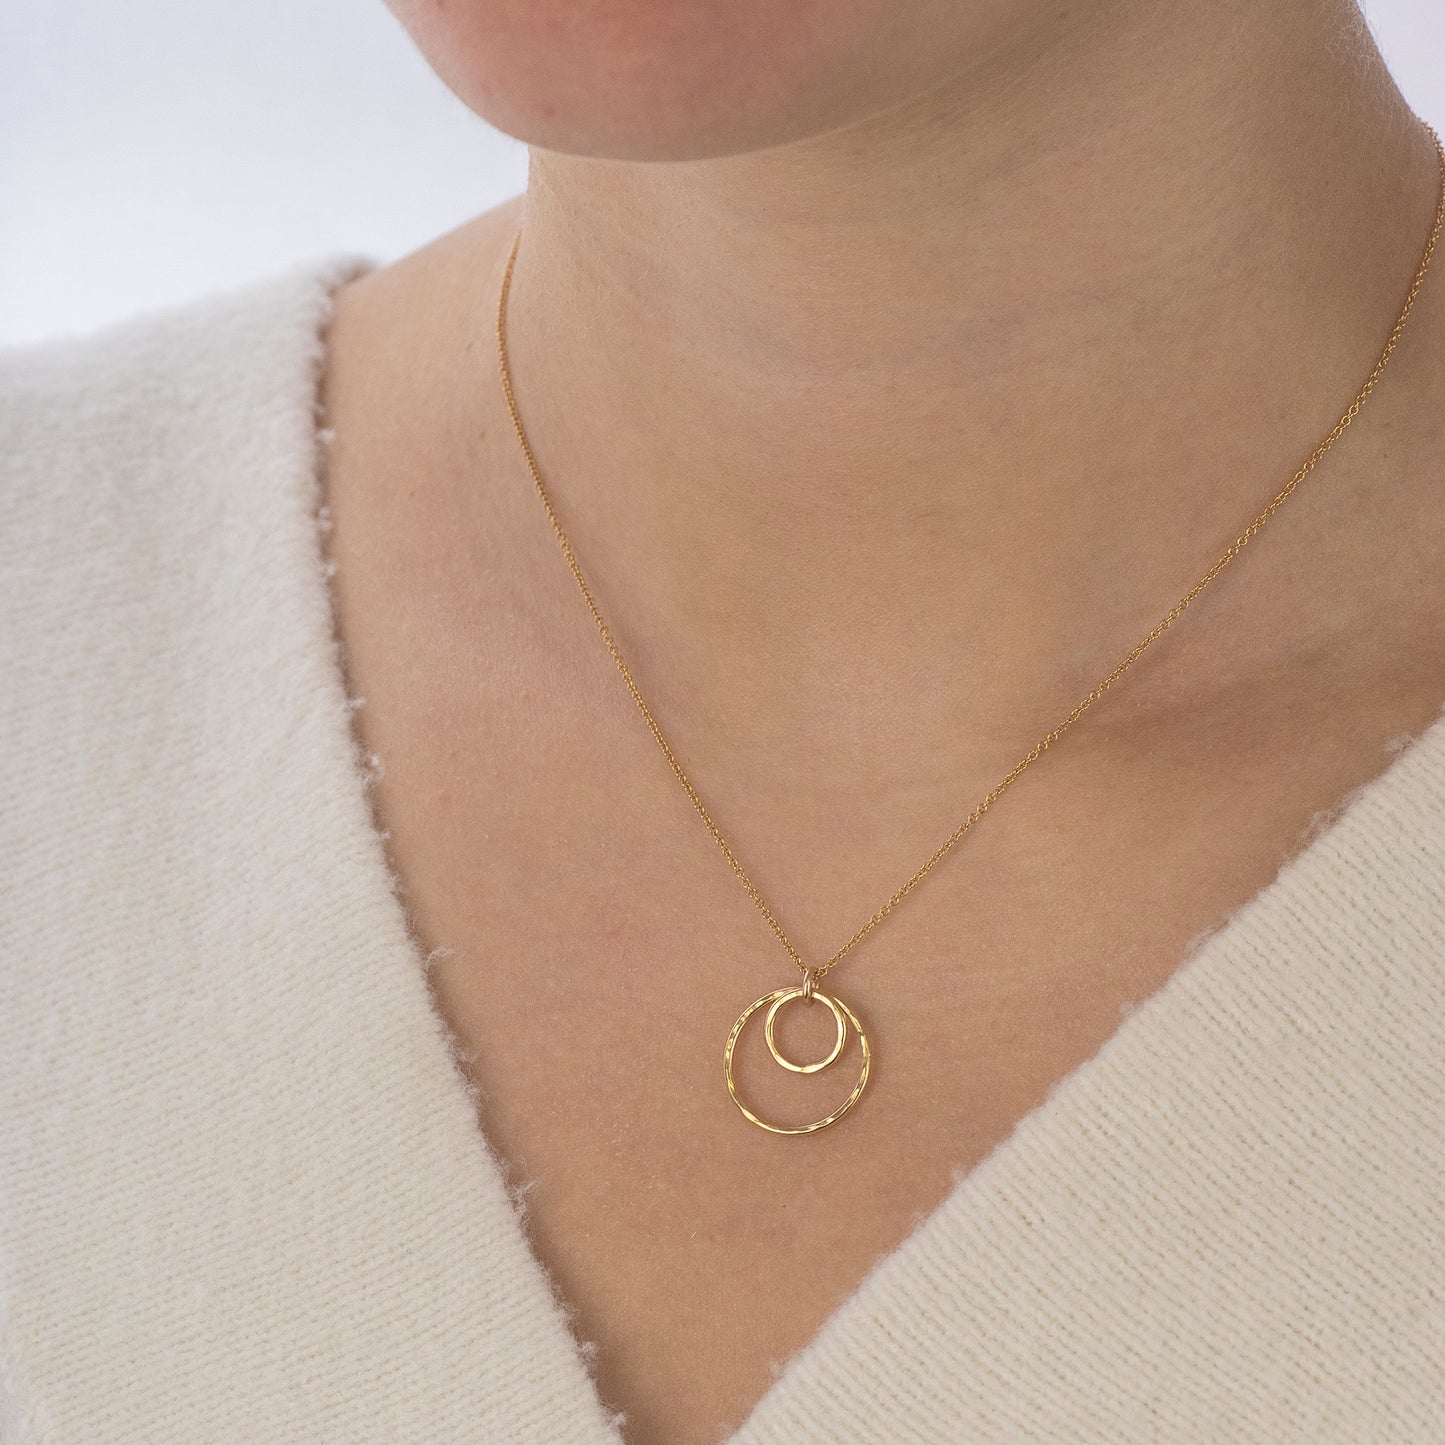 13th Birthday Necklace - Silver & Gold - Forever Encircled with Love